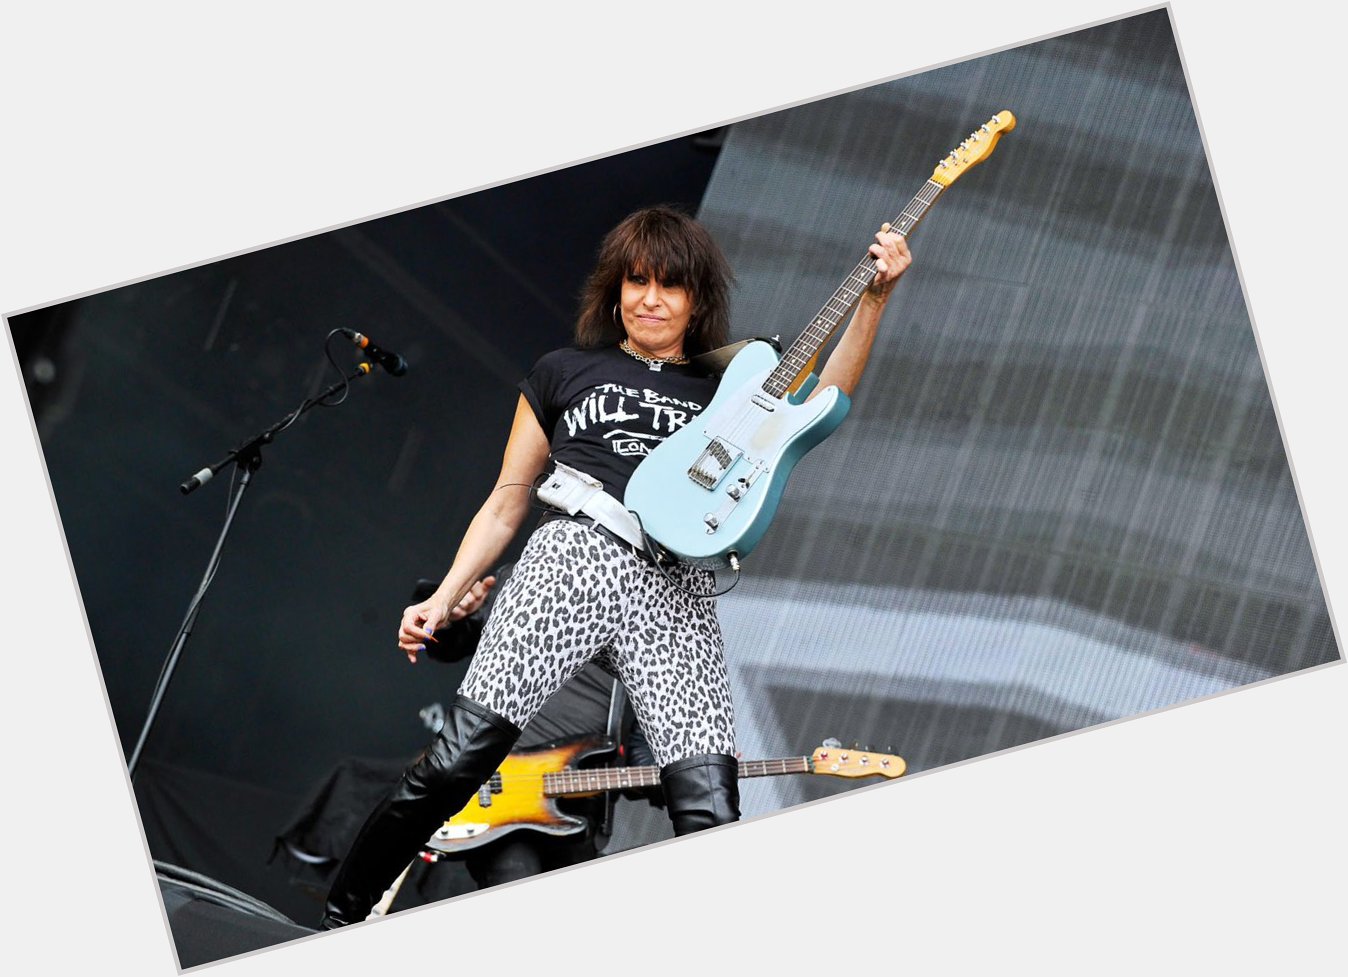 A very happy birthday to the fabulous Chrissie Hynde - Keep on Pretending!!!! 